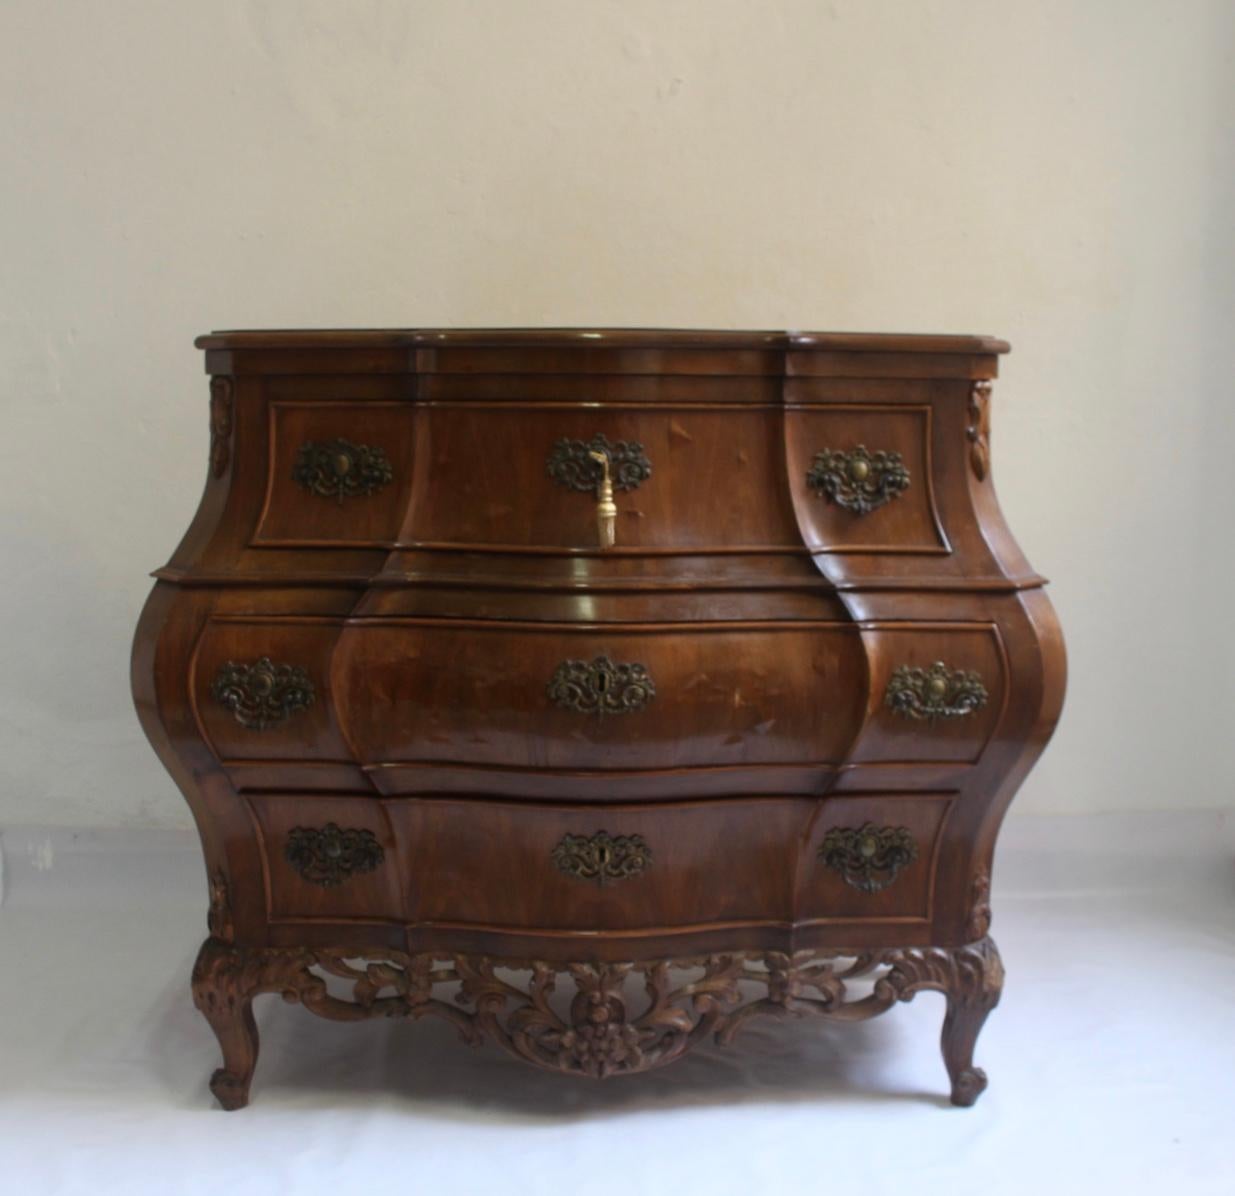 Midcentury handcrafted Bombé Louis XV Rococo Bombe commode or chest of drawers by Mariano García, Valencia, Spain, circa 1960s.
Item has chips to veneer, and some marks at one leg(pictured) but the piece remains in Good Vintage Condition.
Mariano